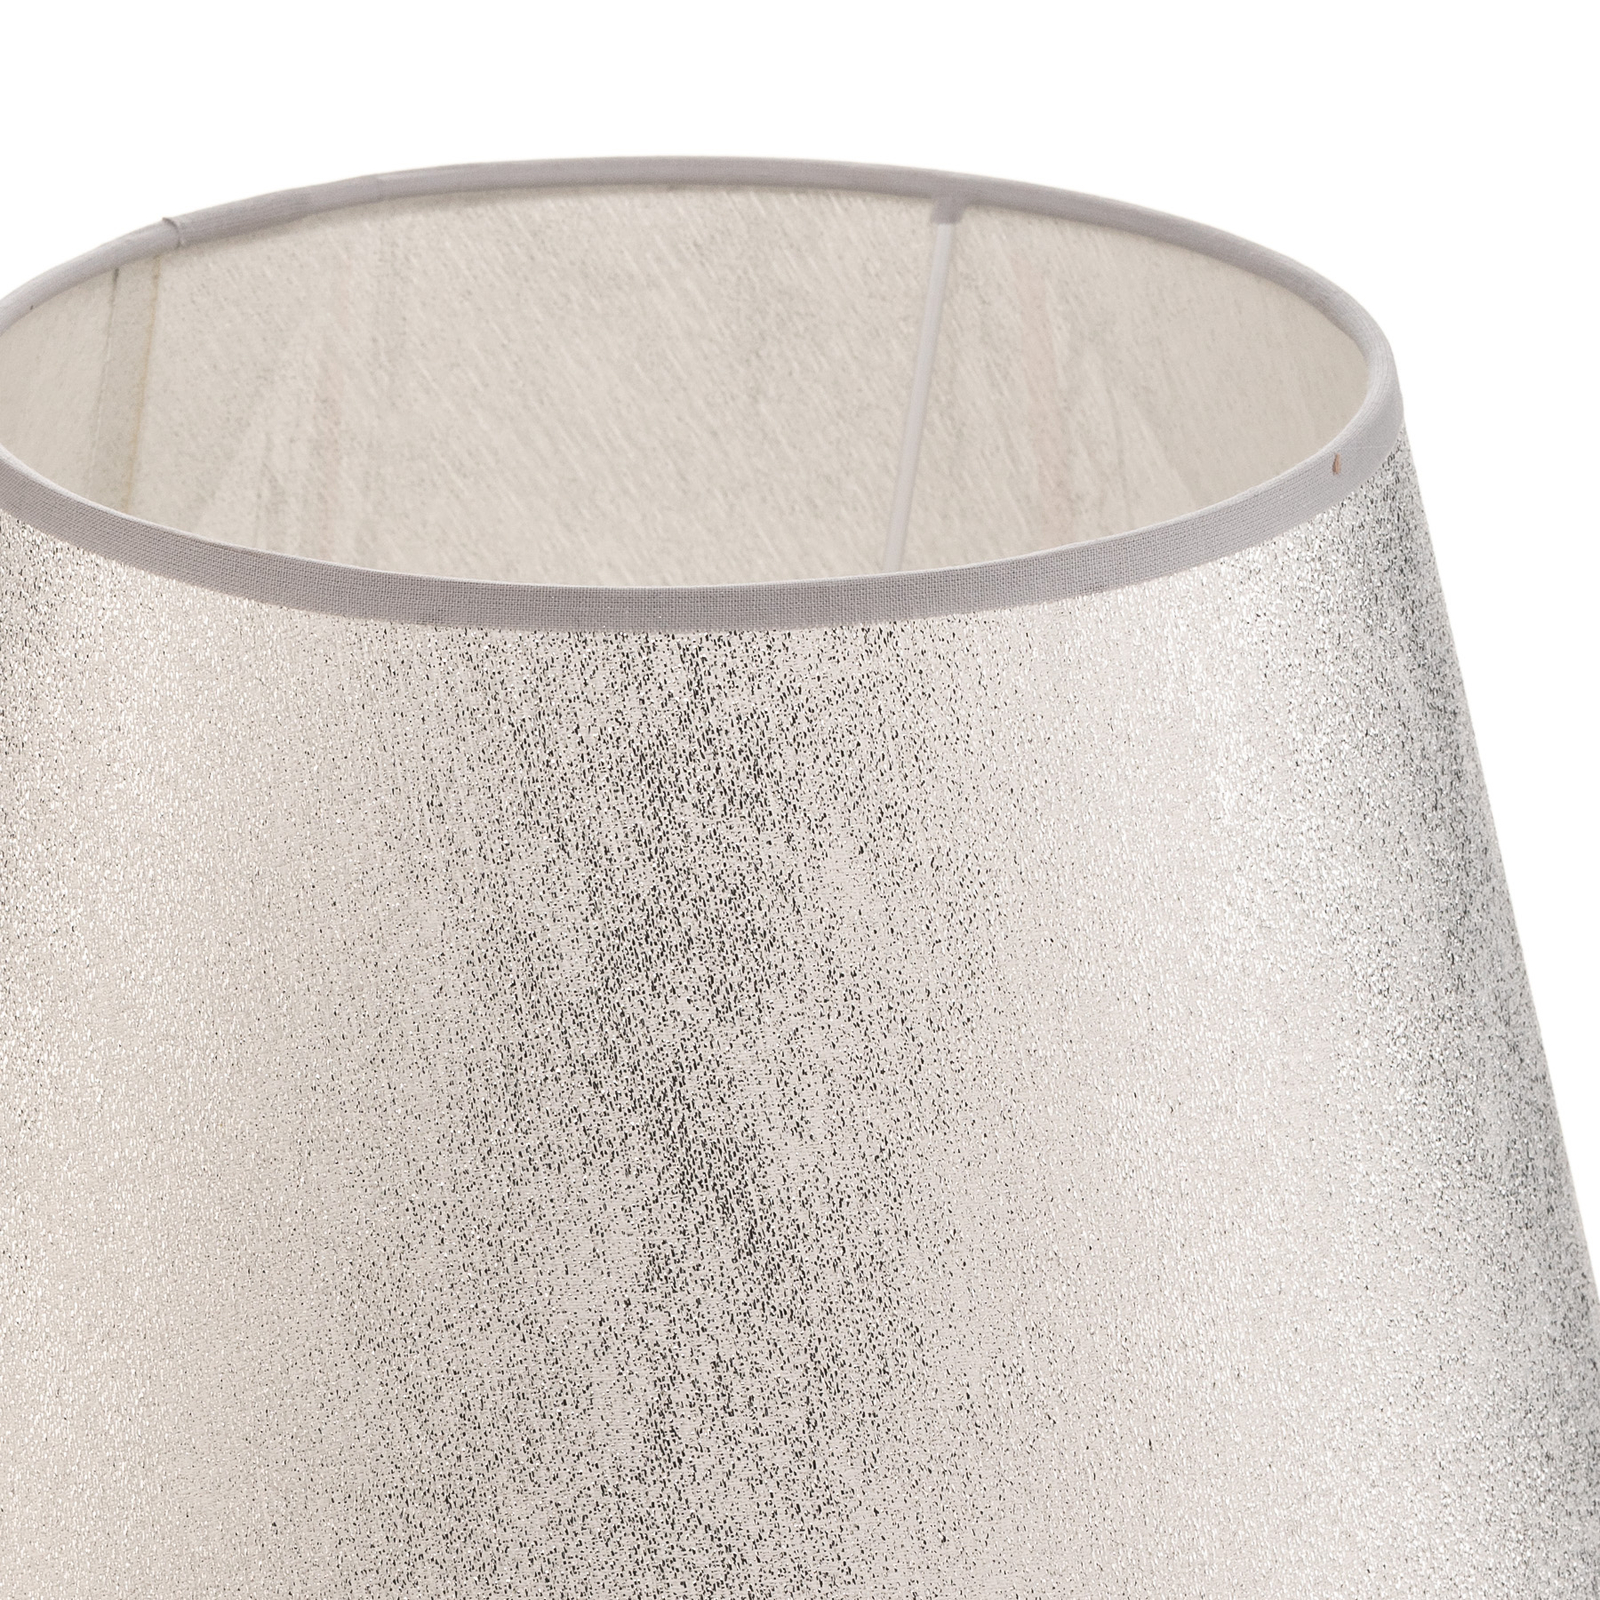 Cone lampshade height 18 cm, silver metallised